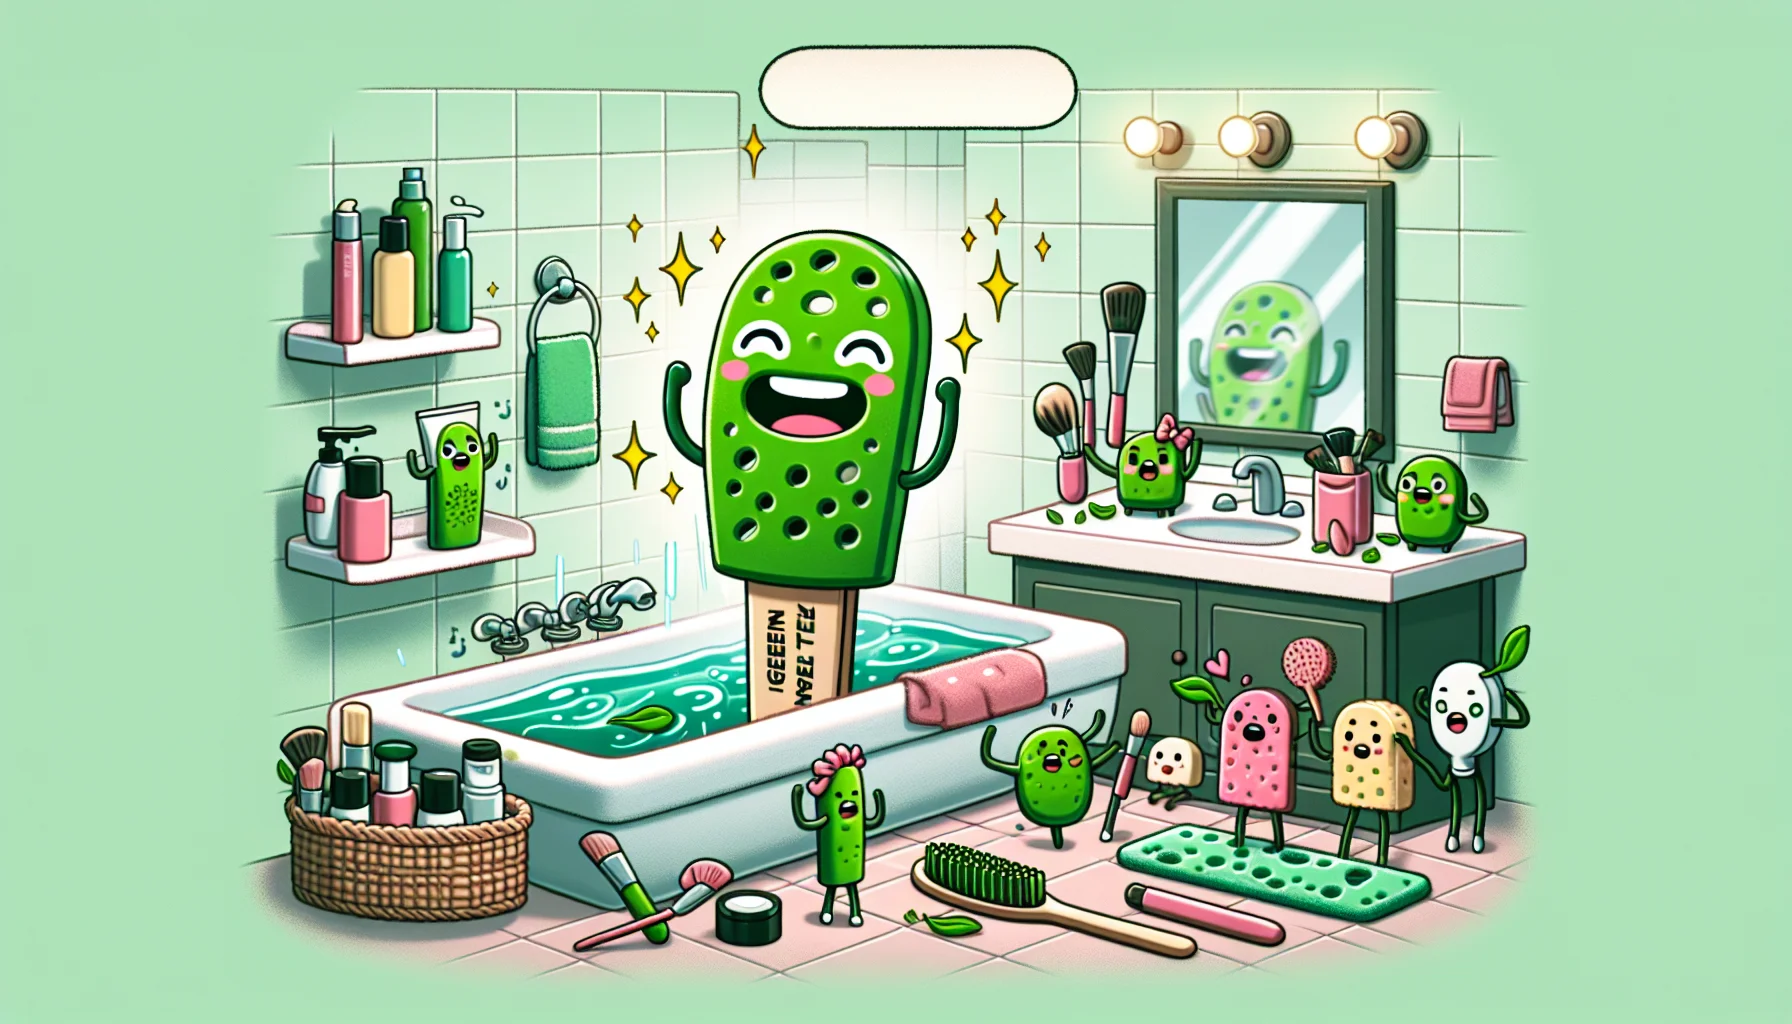 Imagine a lively and interesting scenario unfolding. There's a green tea mask stick coming to life, its label transformed into a playful smile. The mask stick, personified with cartoon-like eyes, arms, and legs, is making its way through a bathroom filled with various beauty products. Some of the products are looking at it with surprise, others with interest, as it energetically performs a tap dance on the counter. A small group of brushes and sponges are clapping, cheering it on. In the corner, a mirror reflects the scene, visually underlining the message: 'Skincare can be fun and exciting. Give this green tea mask stick a try!'